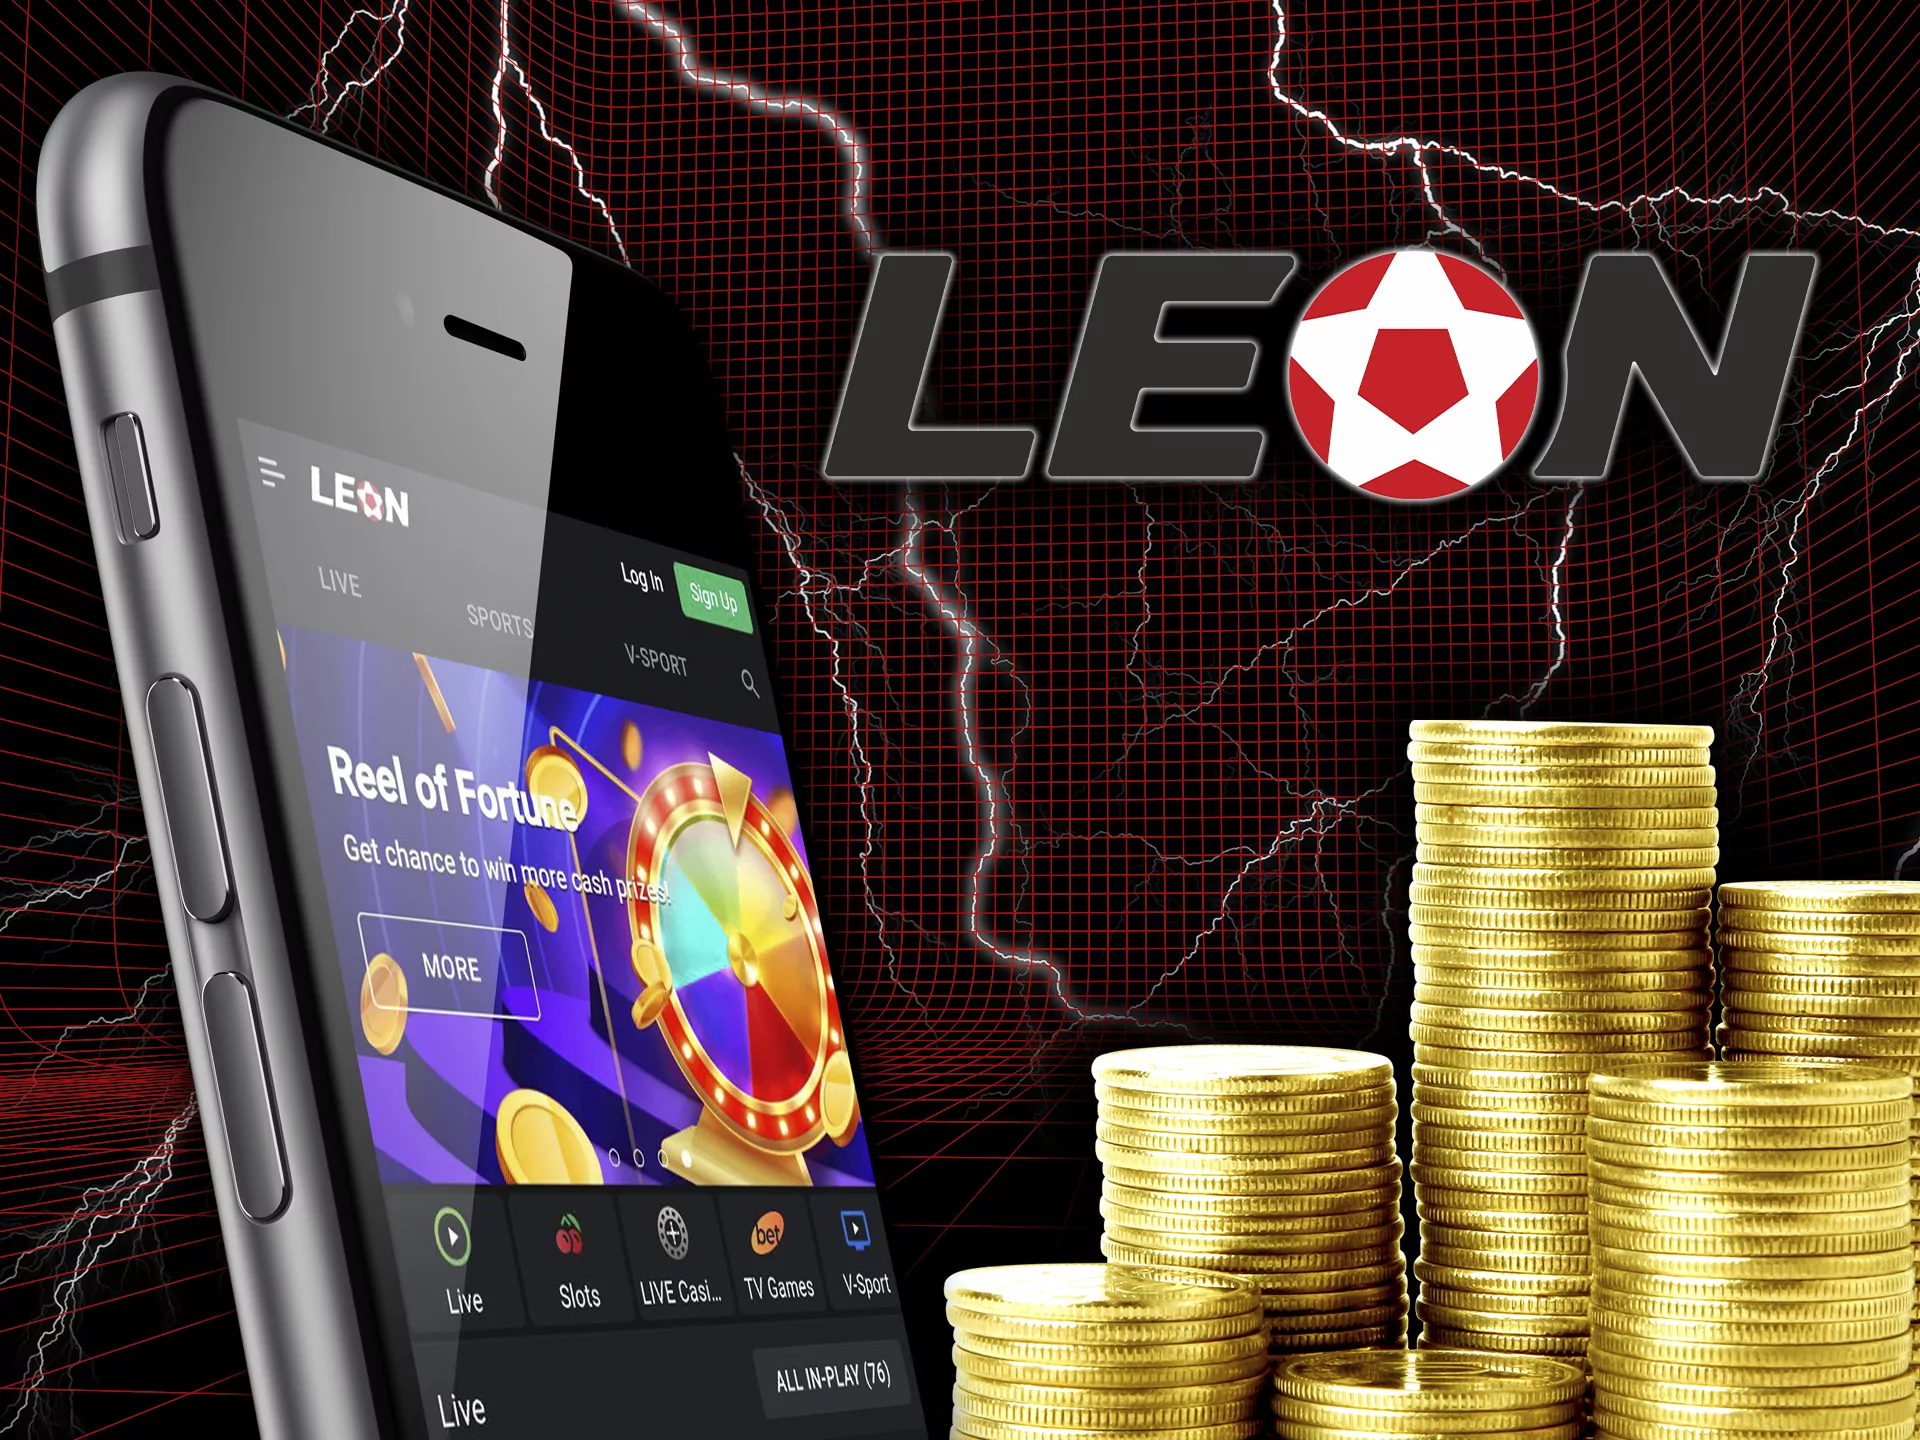 The Leon Bet app offers various casino games.